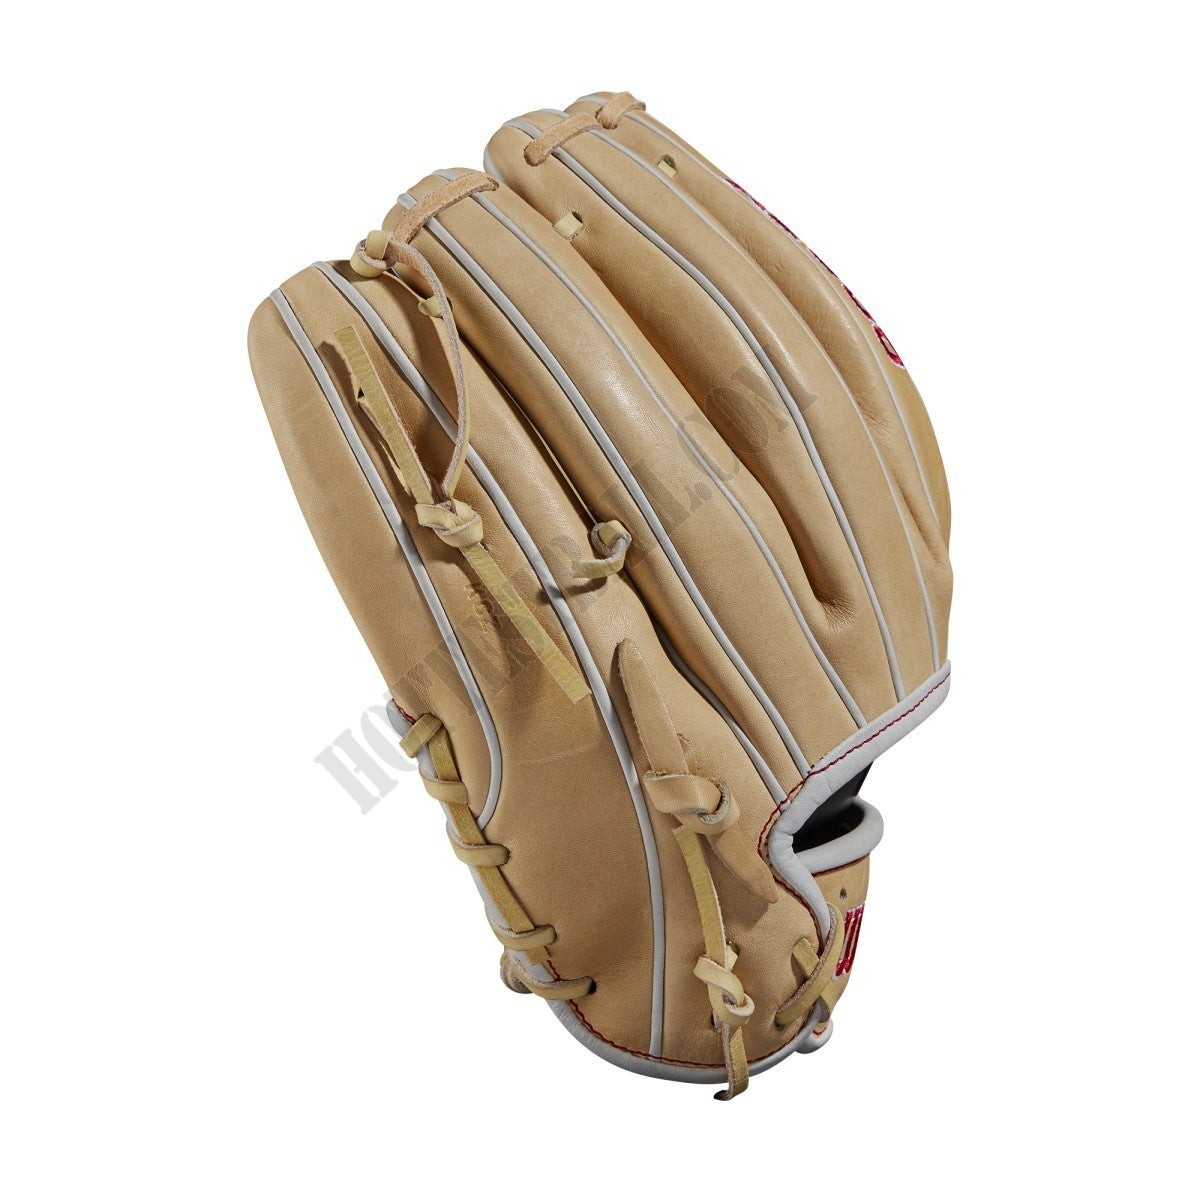 2021 A2000 1786 Bronco 11.5" Infield Baseball Glove - Right Hand Throw ● Wilson Promotions - -4